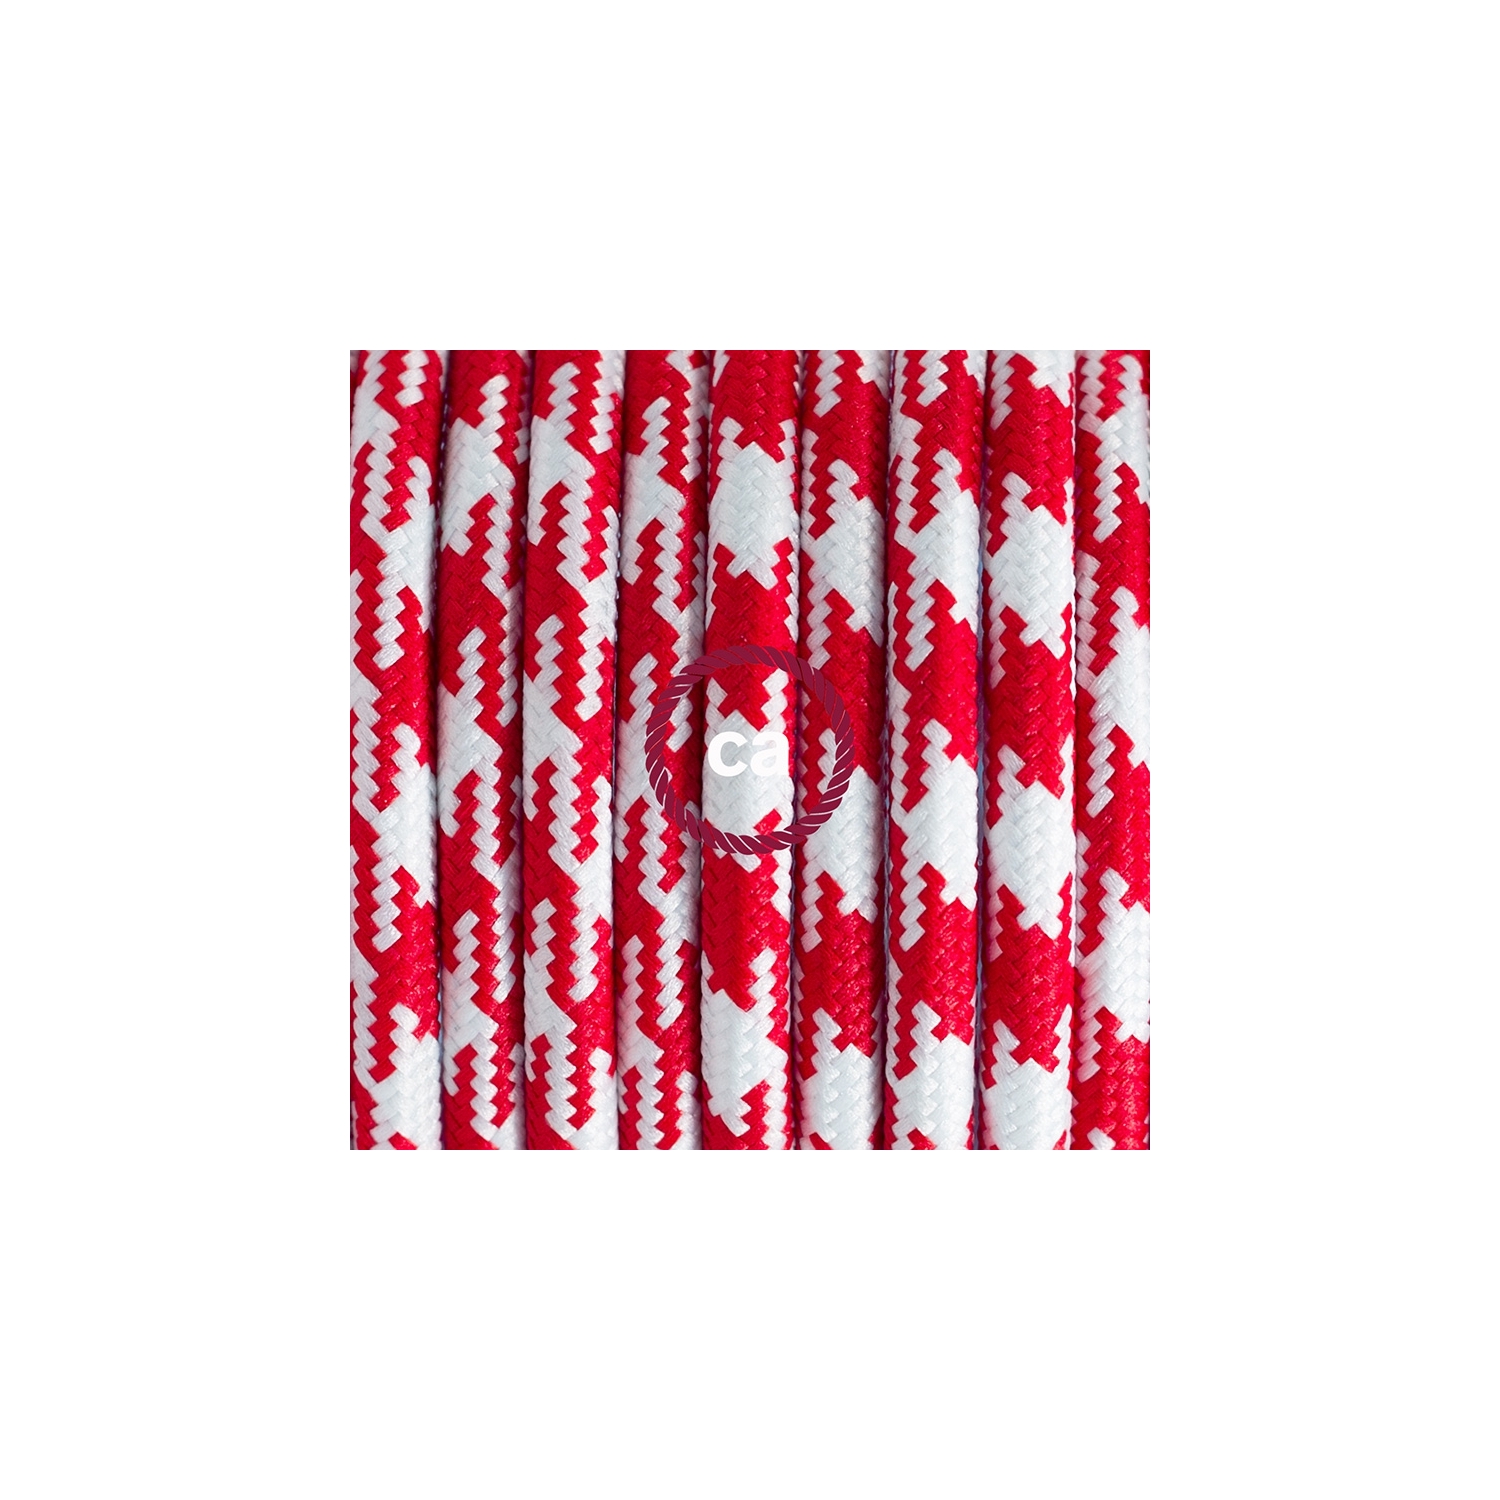 Plug-in Pendant with switch on socket | RP09 Red & White Houndstooth